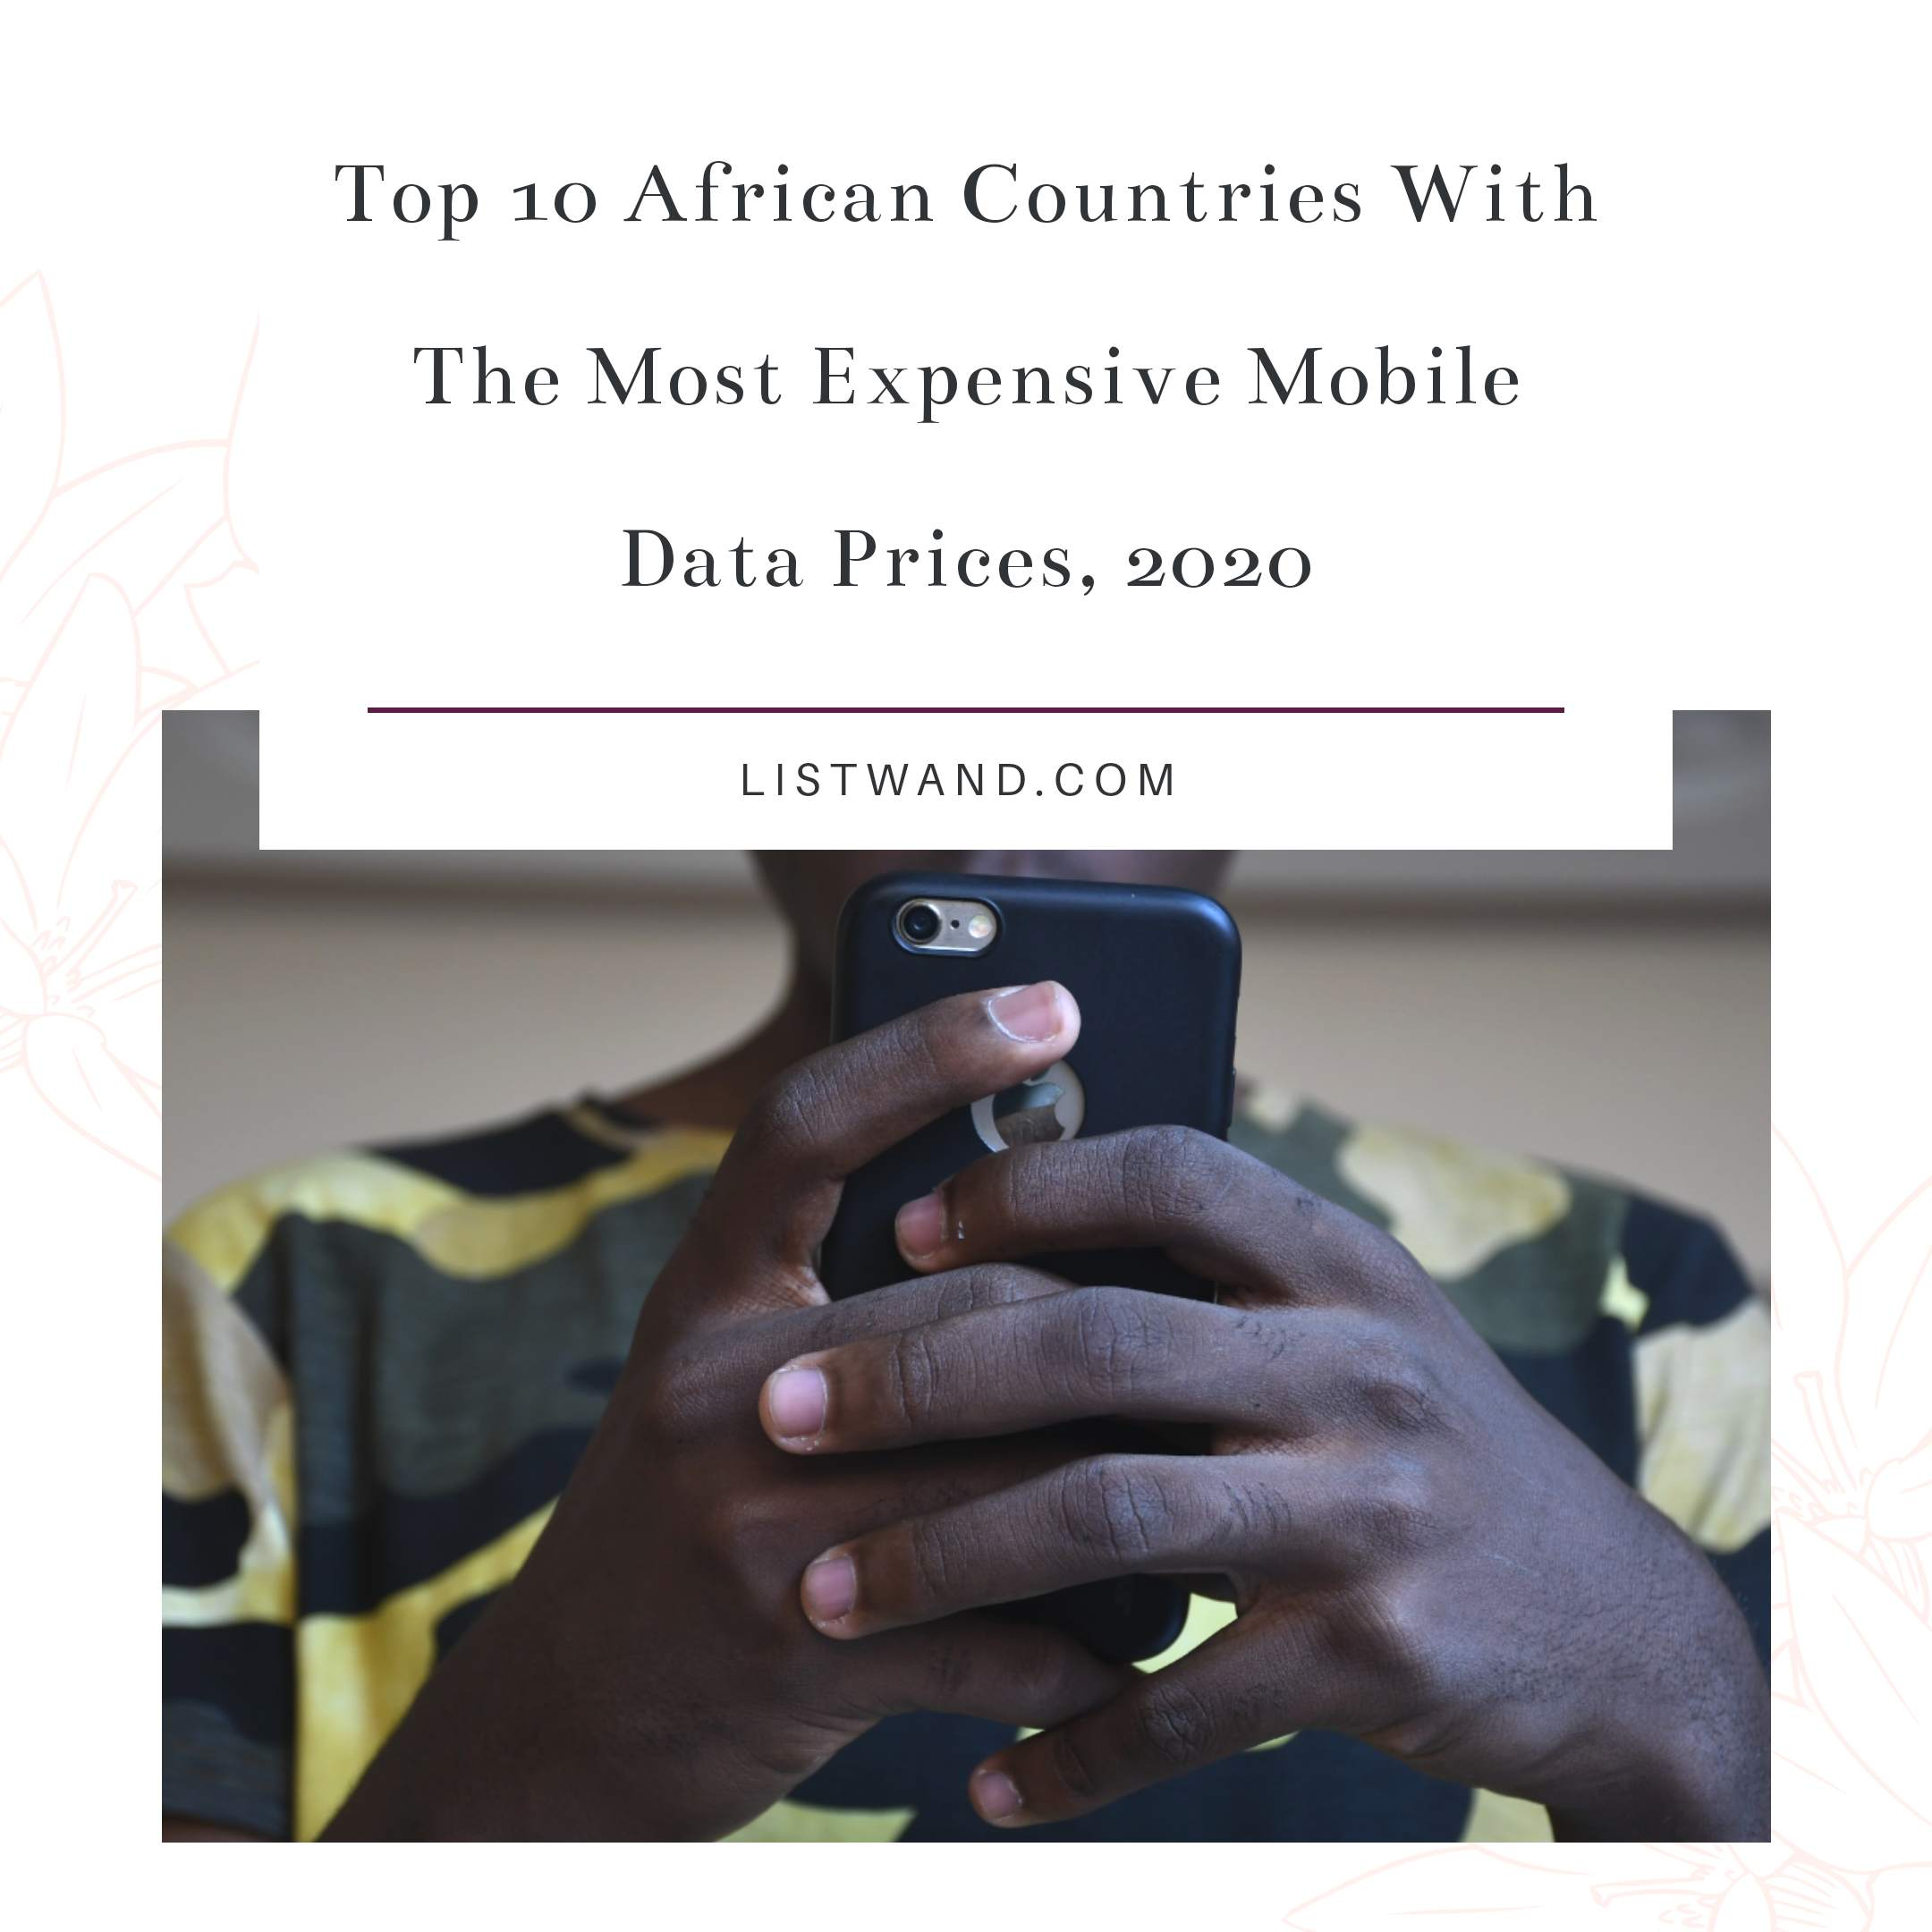 Top 10 African Countries With The Most Expensive Mobile Data, 2020